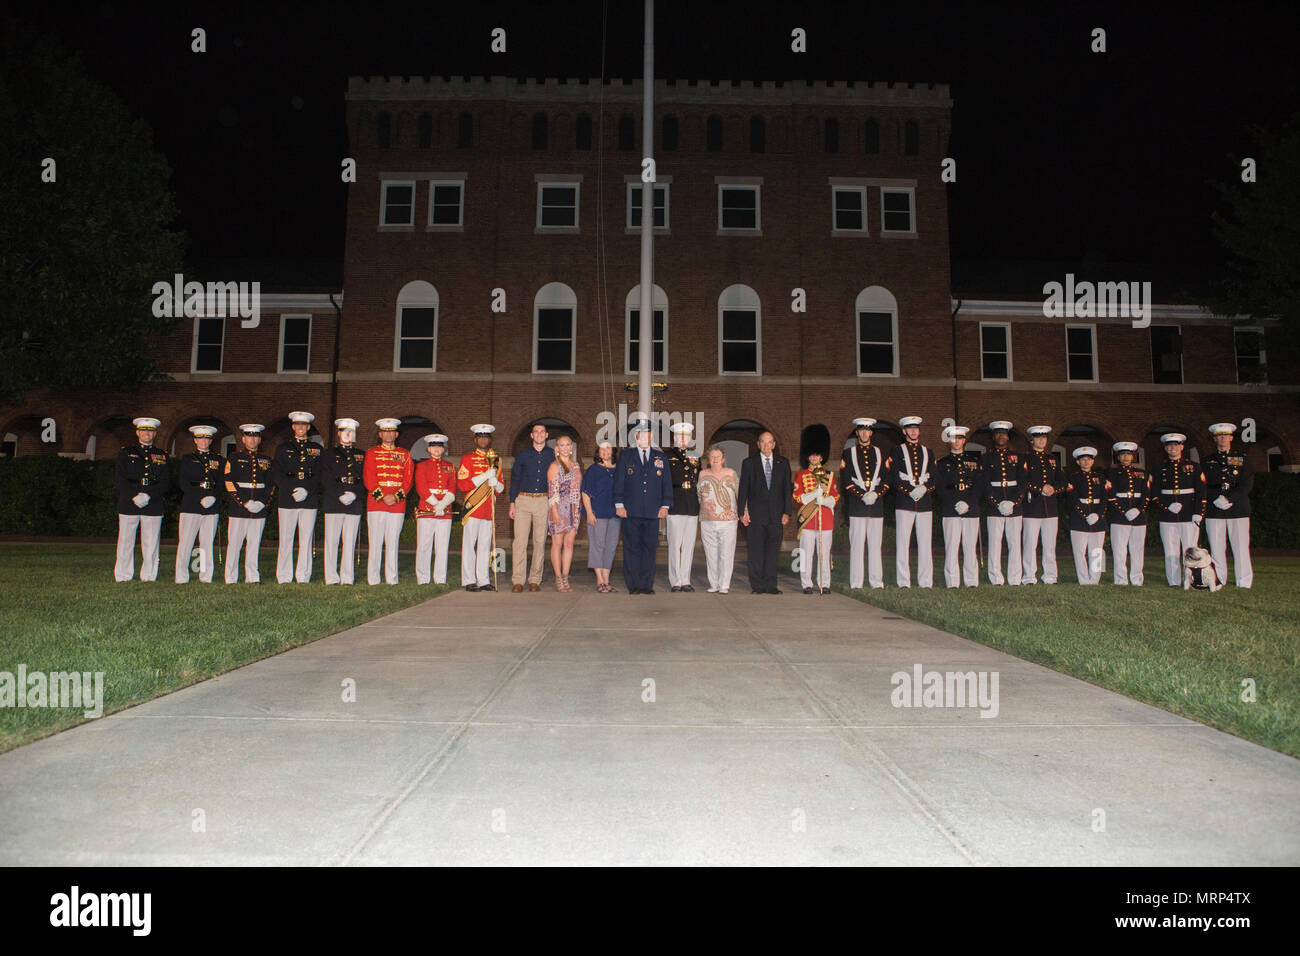 U.S. Air Force Lt. Gen. Thomas J. Trask, vice commander of Headquarters U.S. Special Operations Command (SOCOM) and Director Marine Corps Staff Lt. Gen. James B. Laster, pose for a group photo with Marines and civilians during an evening parade at Marine Barracks Washington, Washington, D.C., June 23, 2017. Evening parades are held as a means of honoring senior officials, distinguished citizens and supporters of the Marine Corps. (U.S. Marine Corps photo by Lance Cpl. Stephon L. McRae) Stock Photo